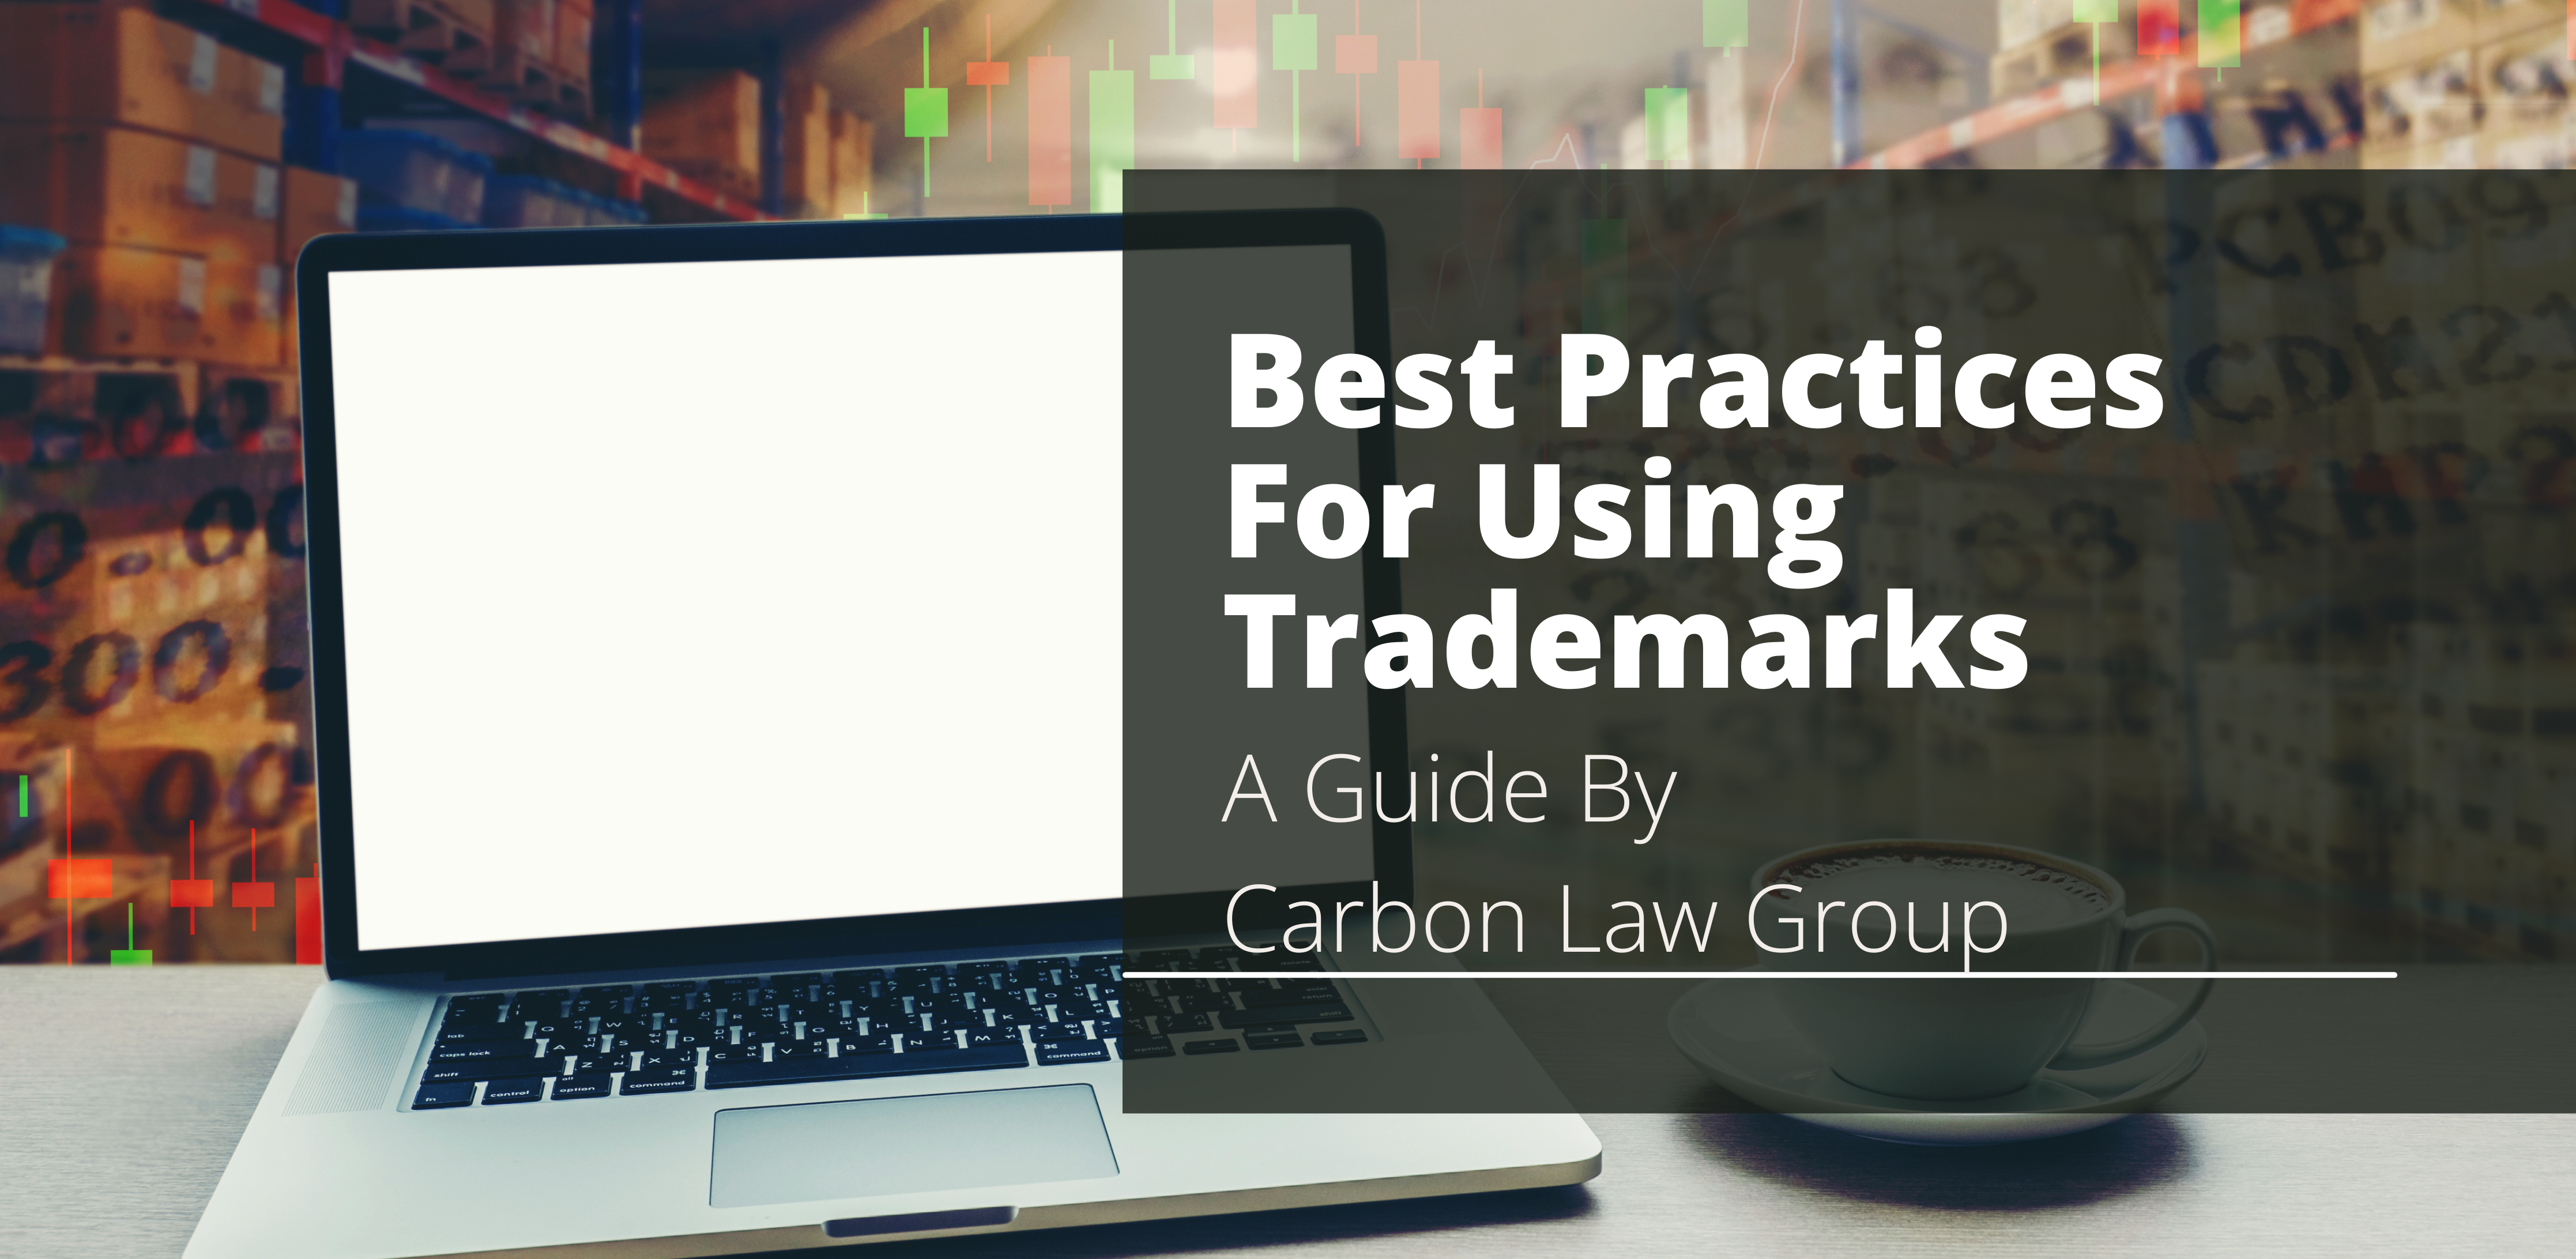 Best Practices For Using Trademarks A Guide By Carbon Law Group